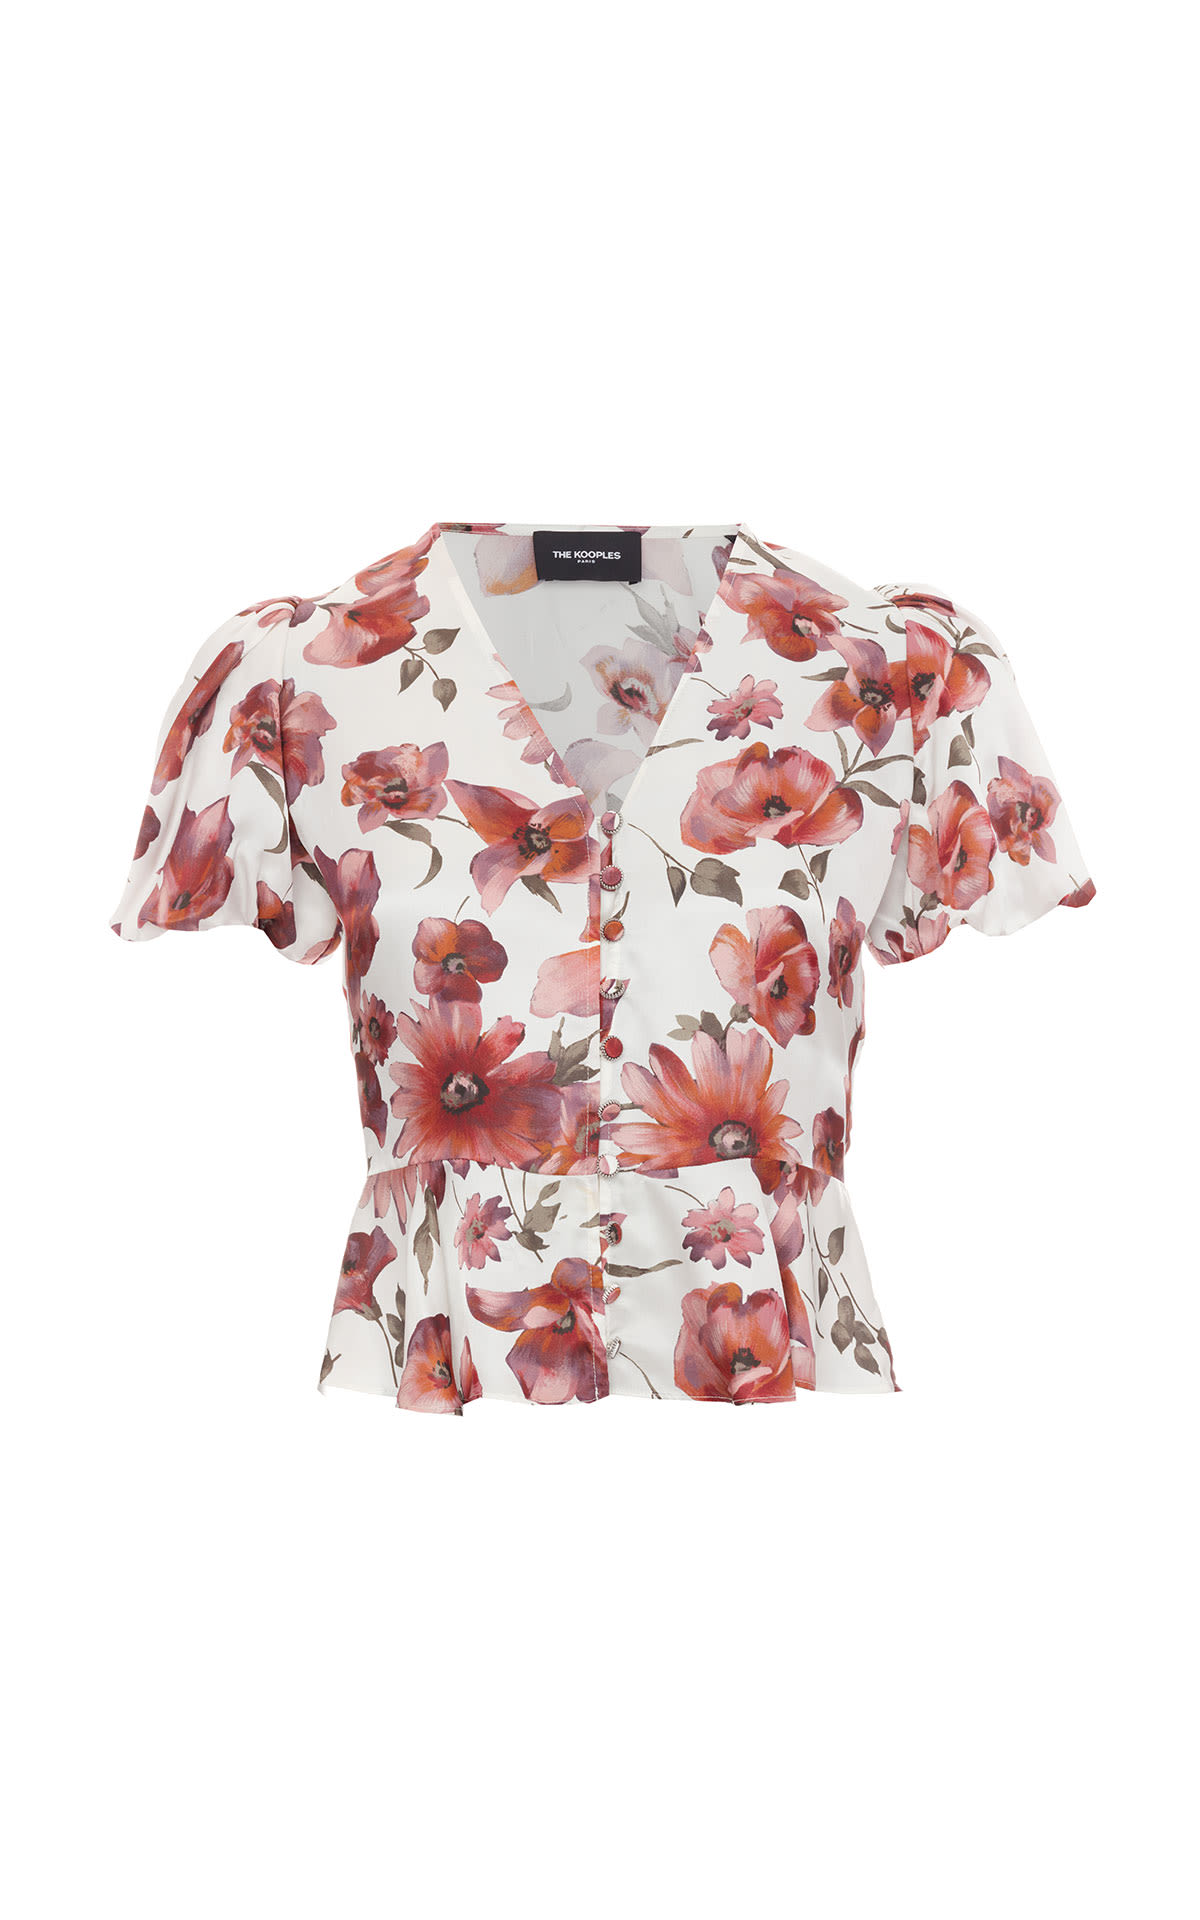 The Kooples Flower top from Bicester Village